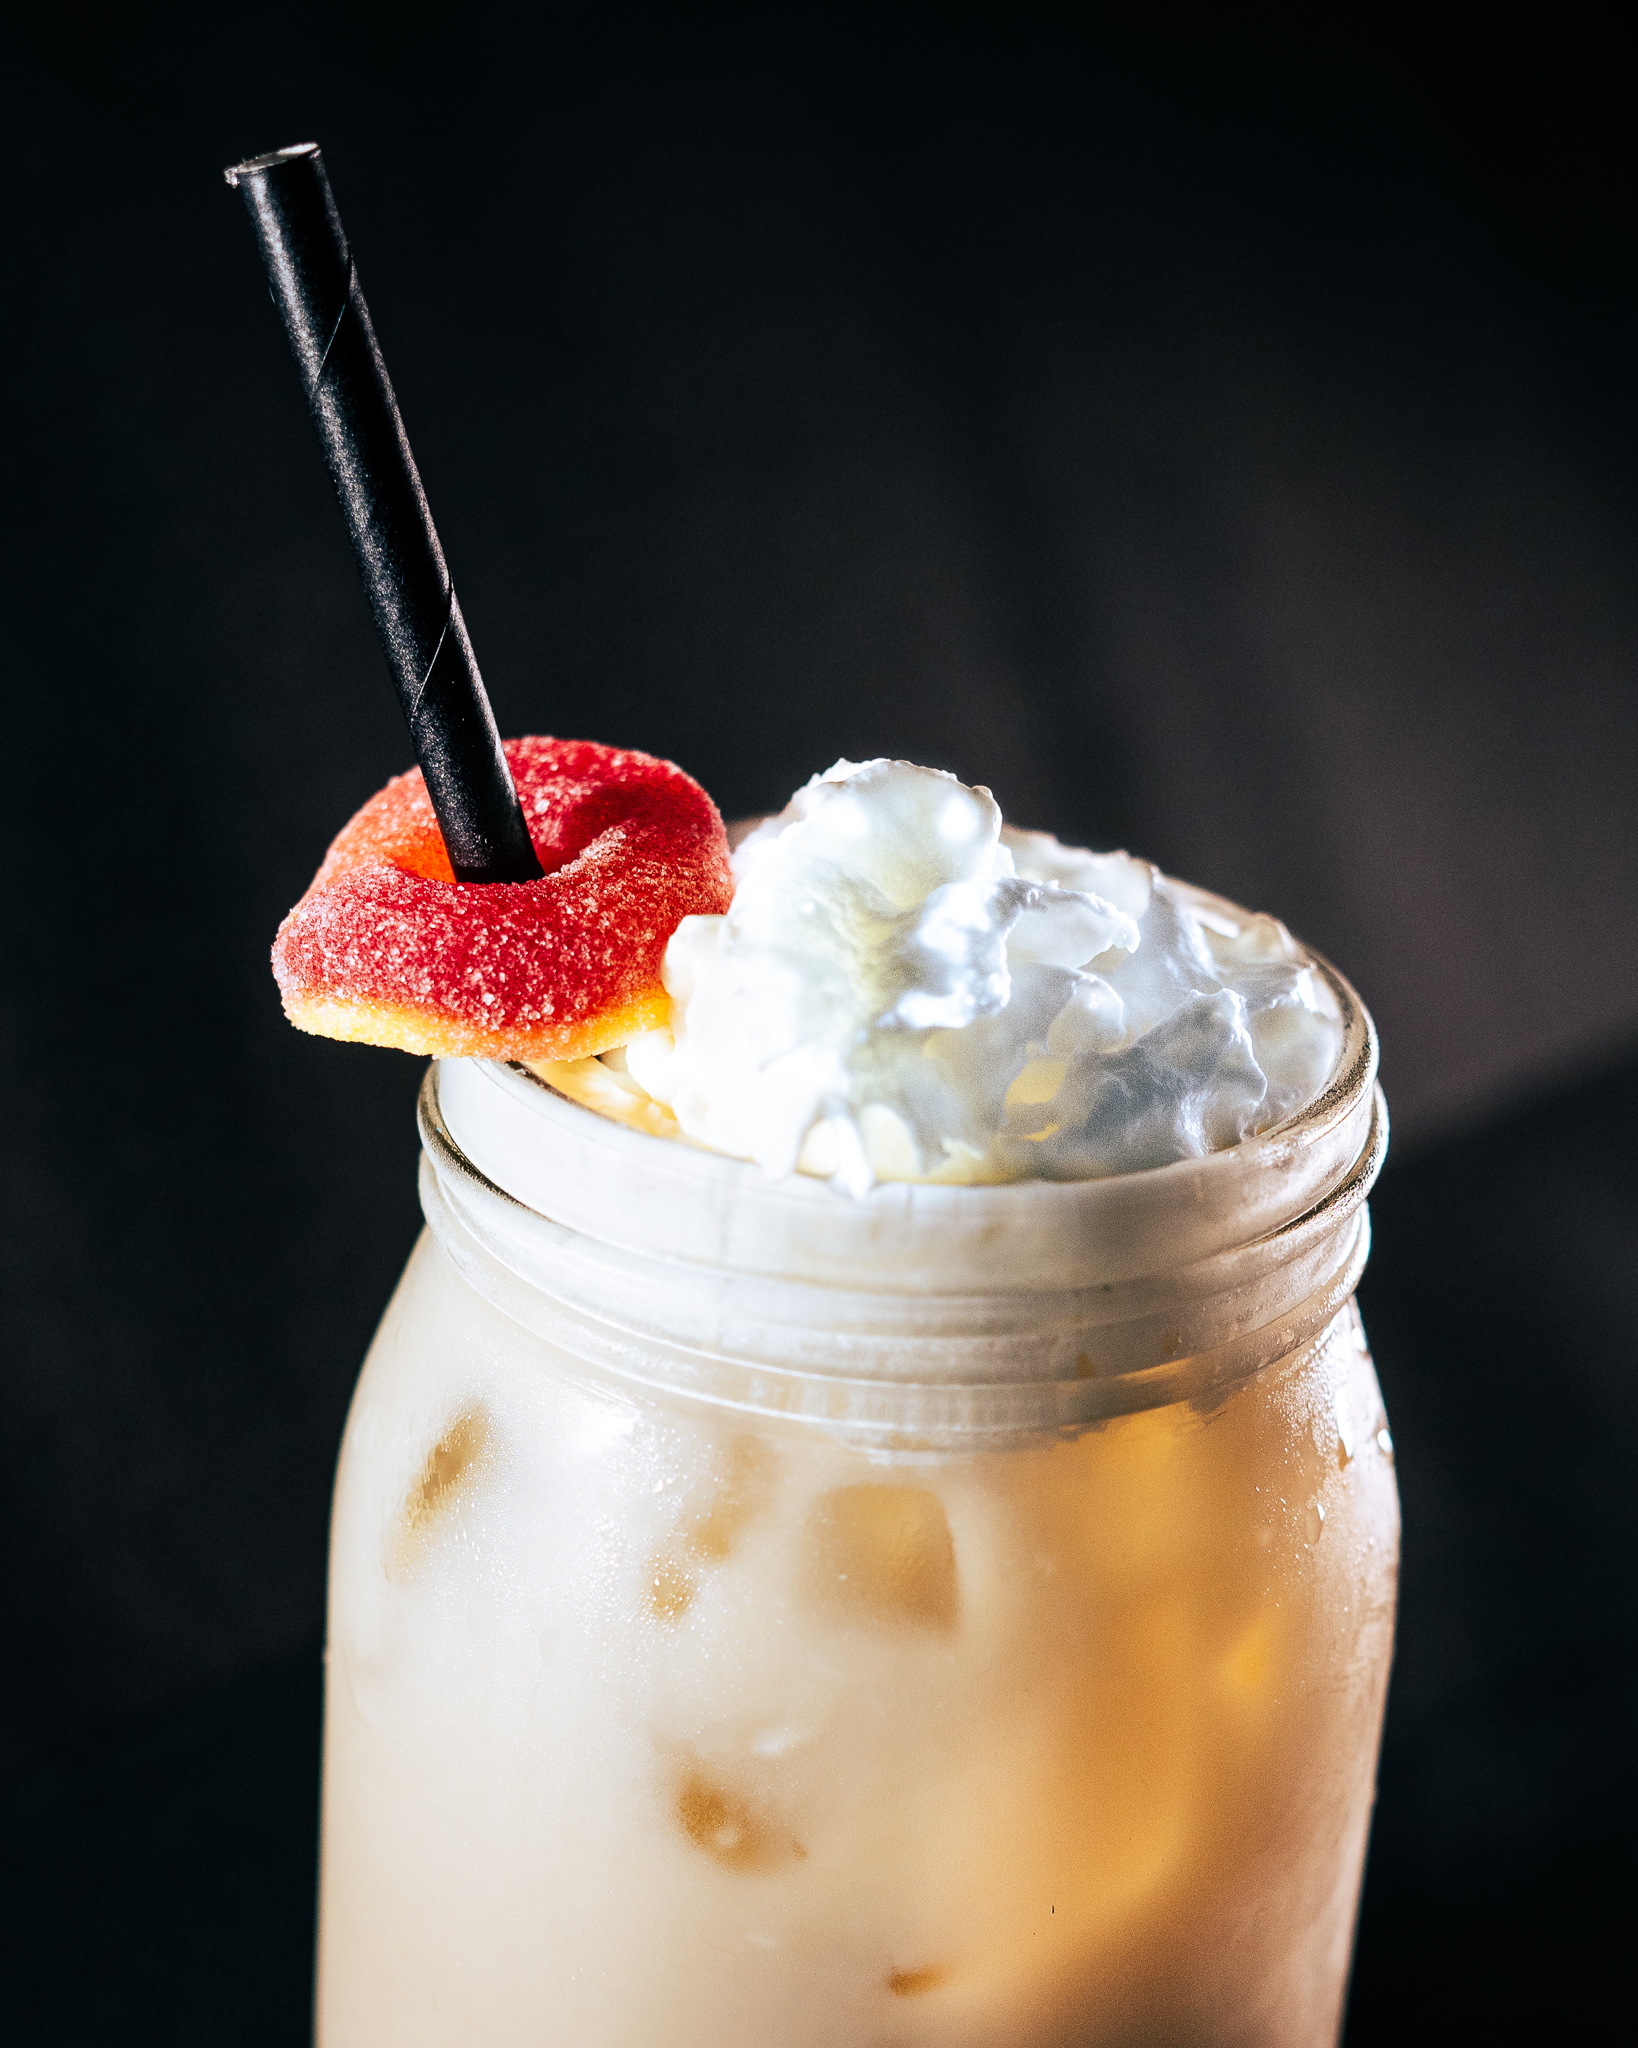 A cream colored tea drink in a mason jar sits against a black background. It's topped with whipped cream, and a candy peach ring around a black straw